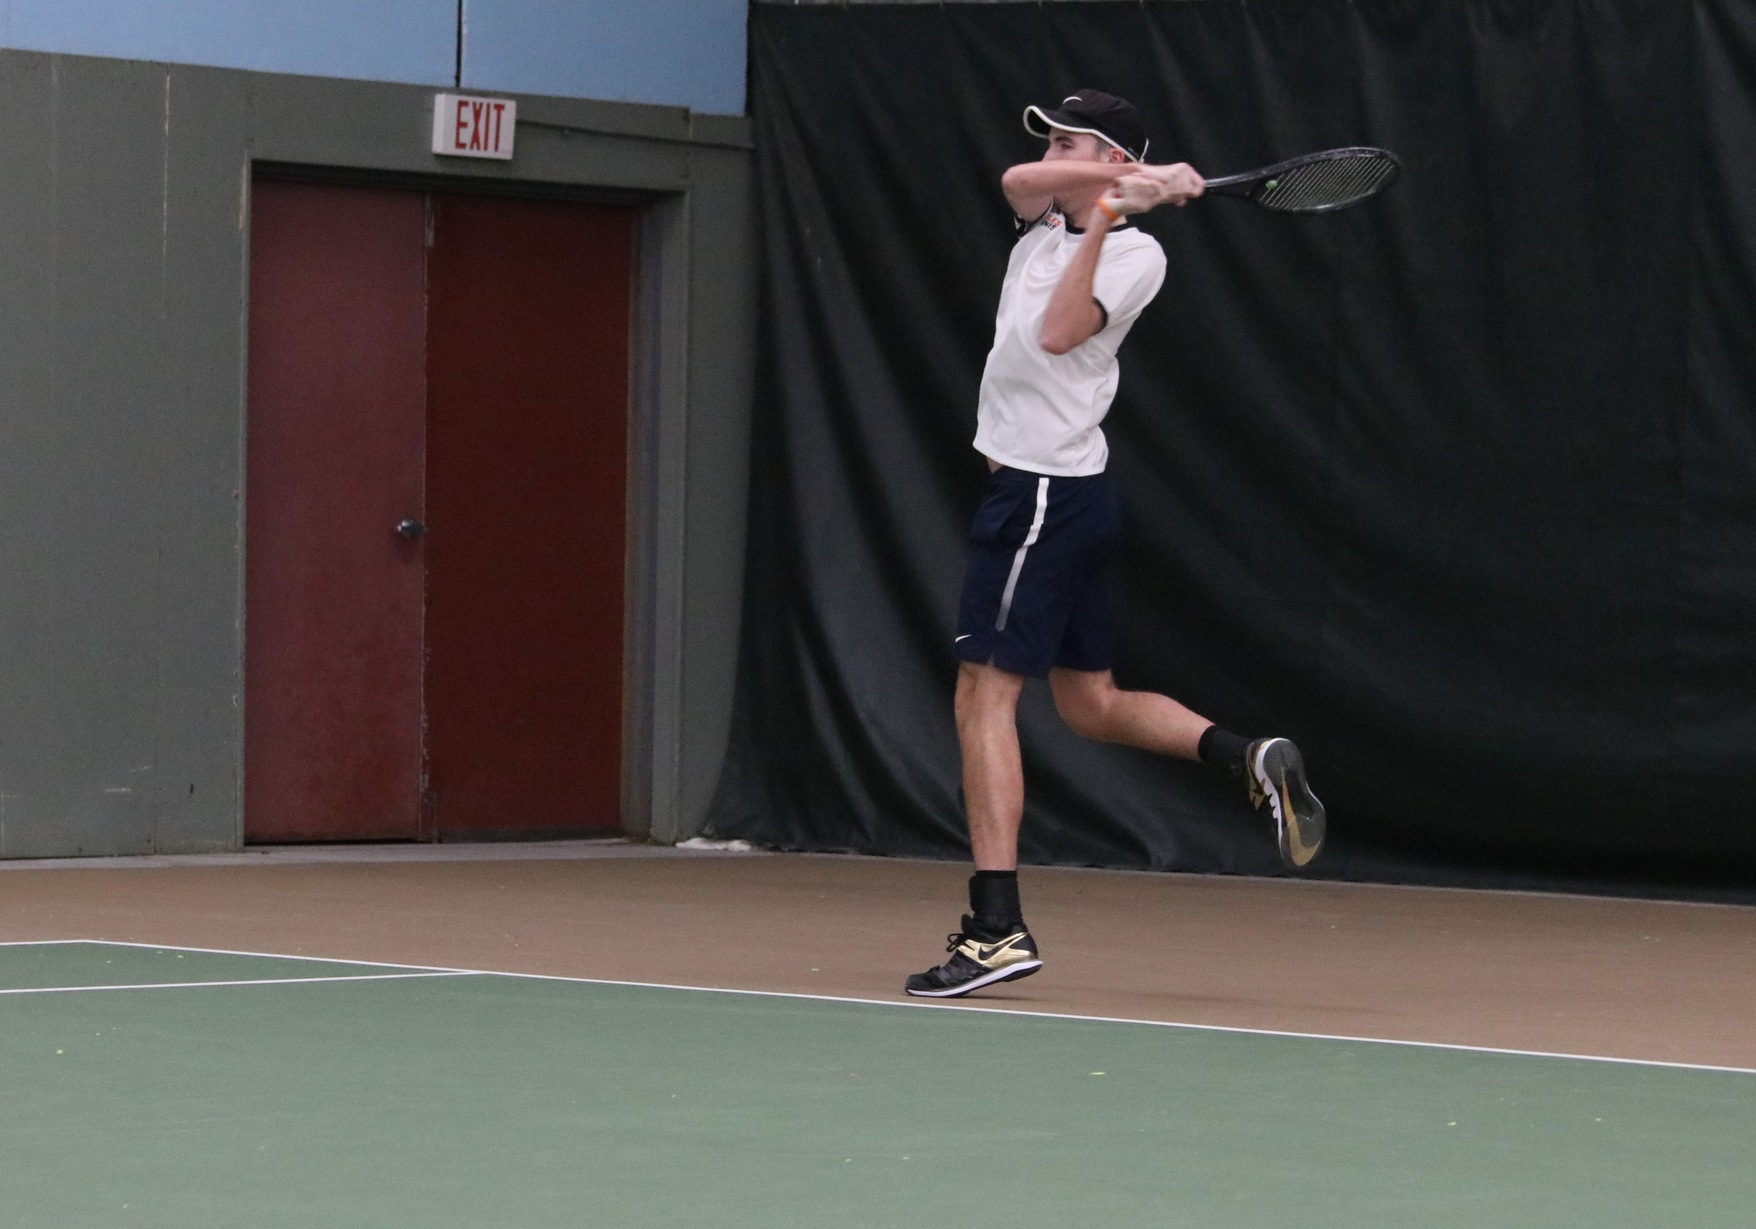 Eagles set for Knoxville Racquet Club finale against Bulldogs